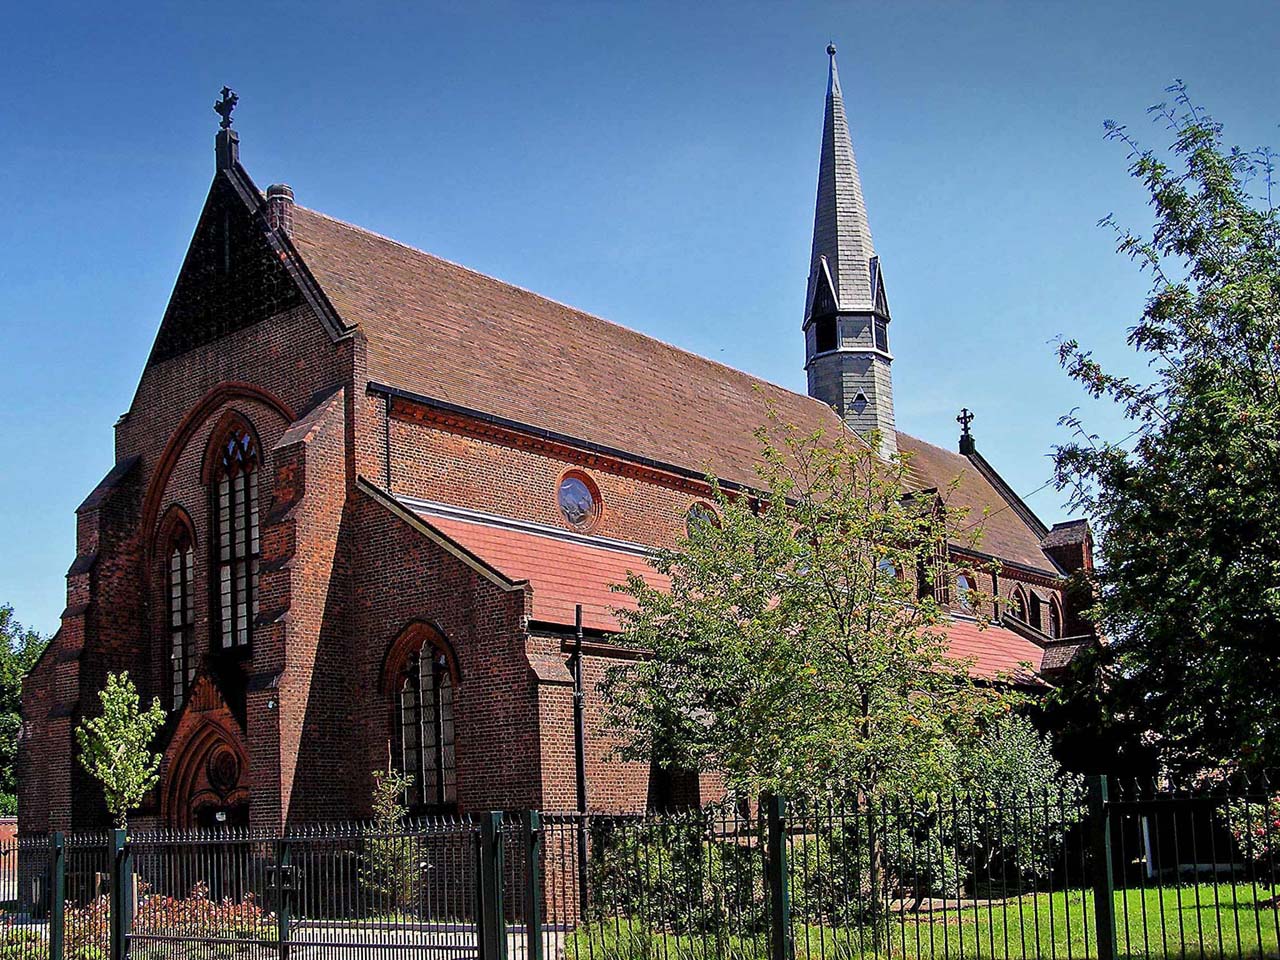 The Church of St Clement, Ordsall. Photograph courtesy of Edward Smith